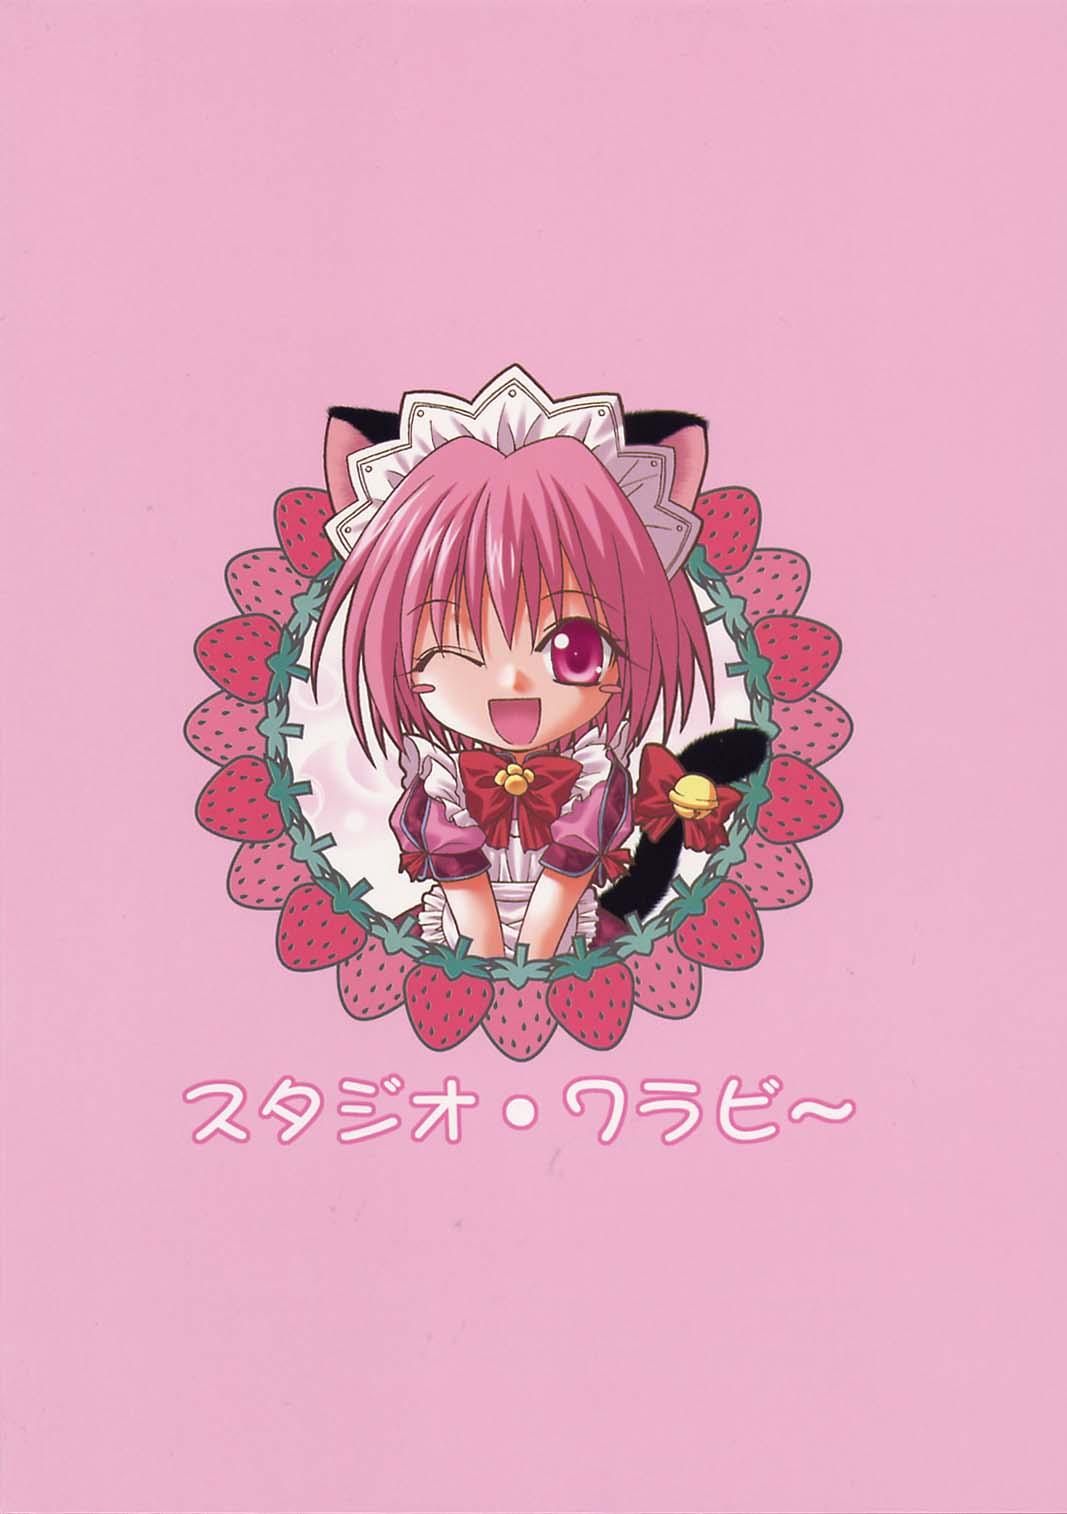 Exhibition Strawberry sex - Tokyo mew mew Youth Porn - Page 26